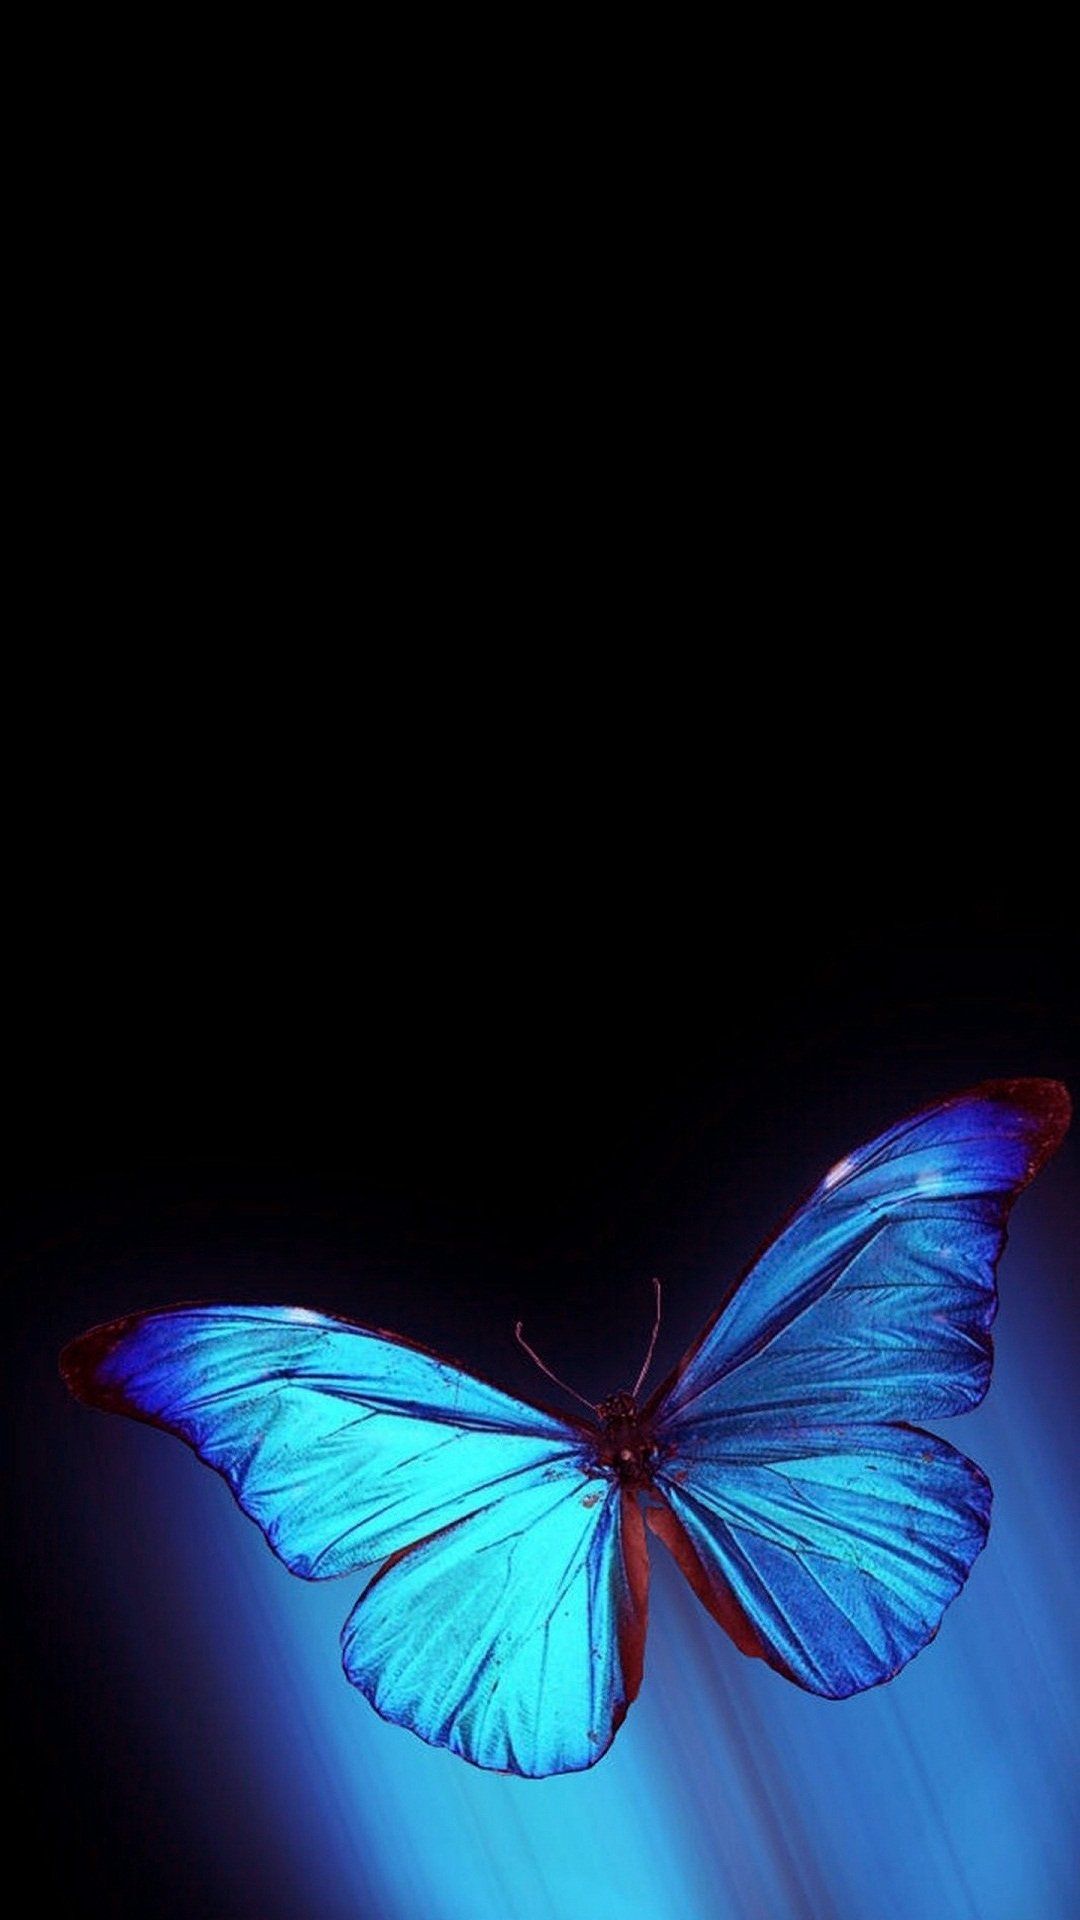 15 Greatest blue butterfly wallpaper aesthetic for laptop You Can Get ...